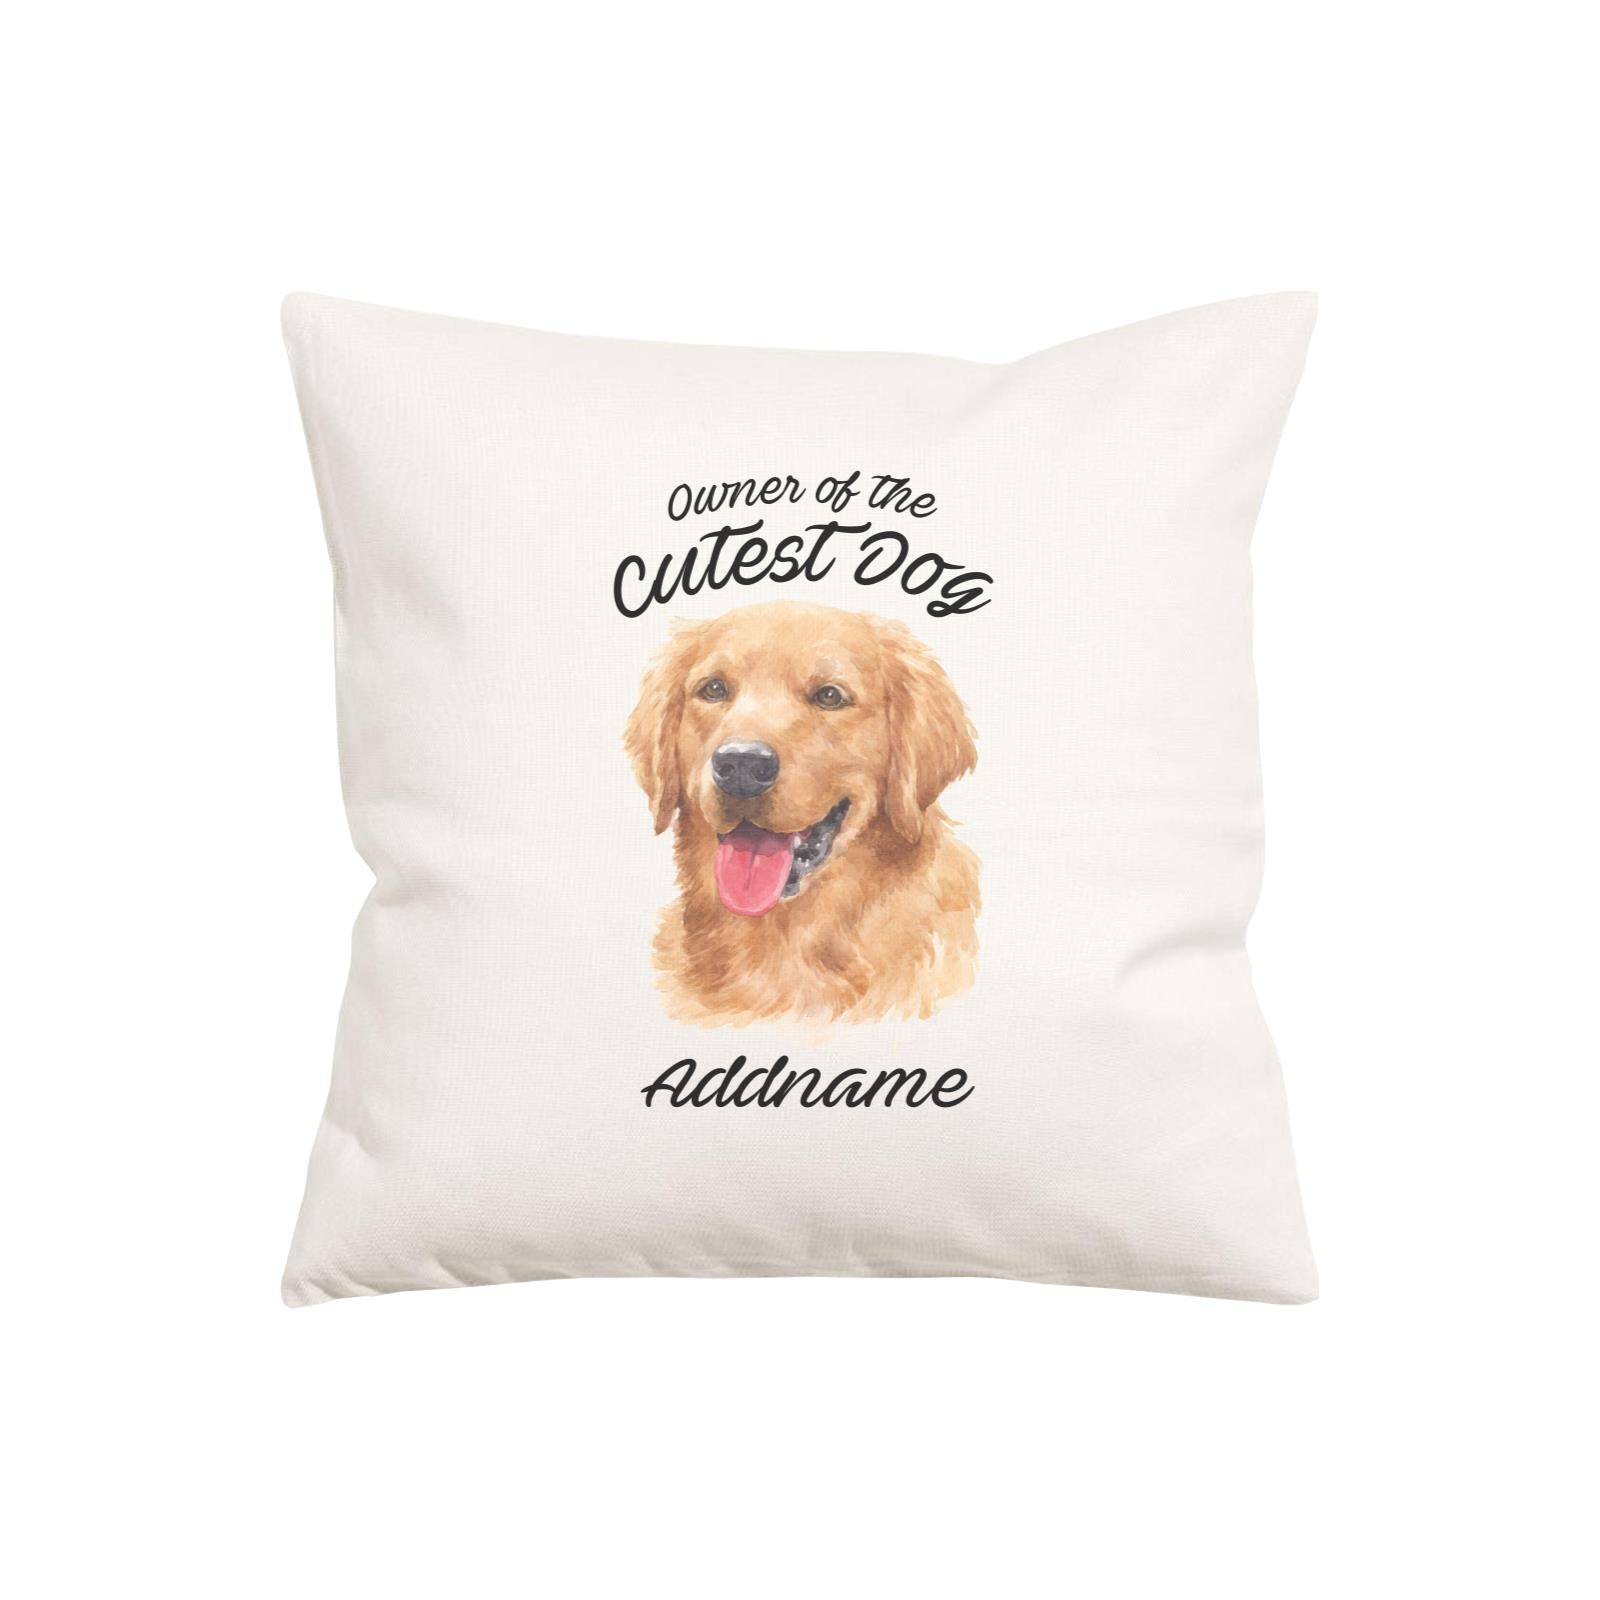 Watercolor Dog Owner Of The Cutest Dog Golden Retriever Addname Pillow Cushion